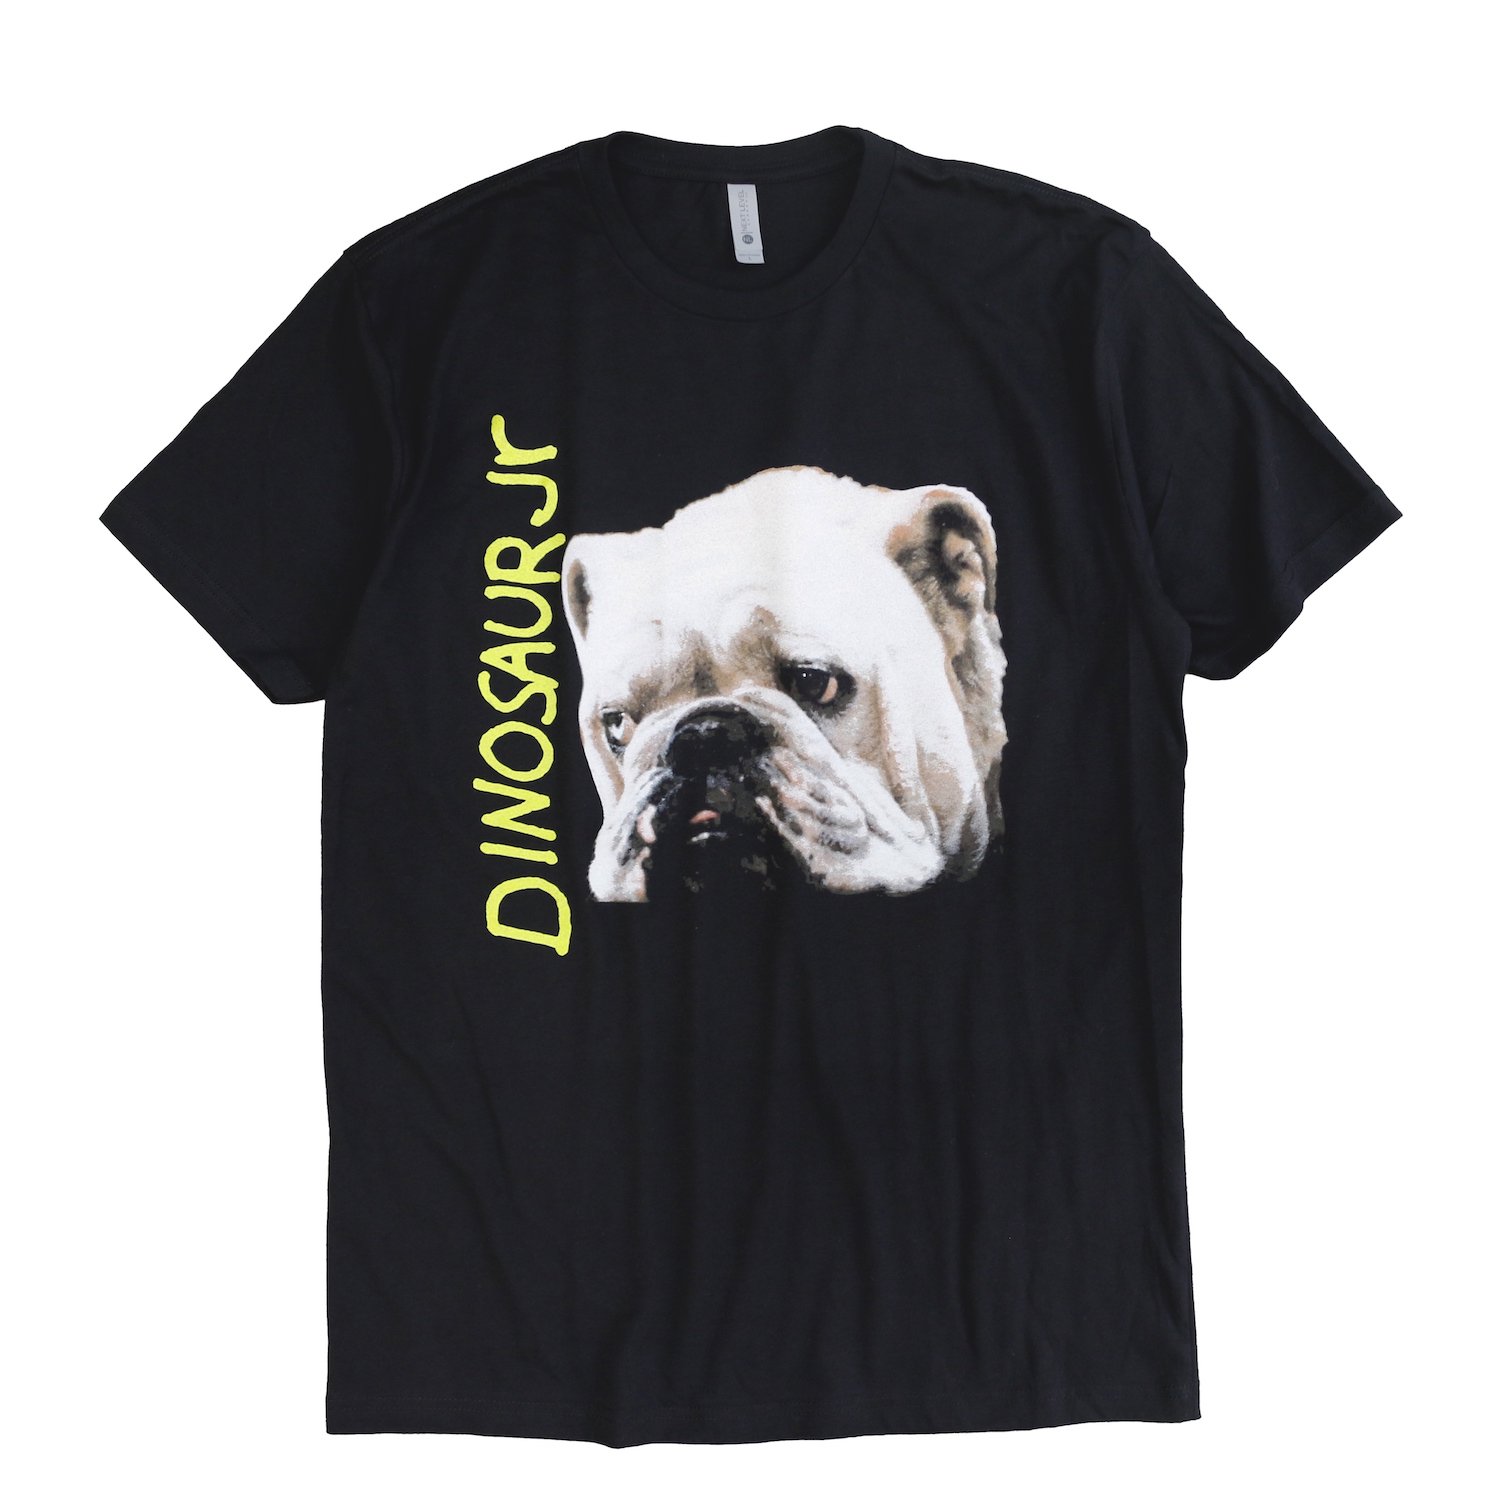 <img class='new_mark_img1' src='https://img.shop-pro.jp/img/new/icons8.gif' style='border:none;display:inline;margin:0px;padding:0px;width:auto;' /> Music Tee / S/S  TEE DINOSAUR JR 